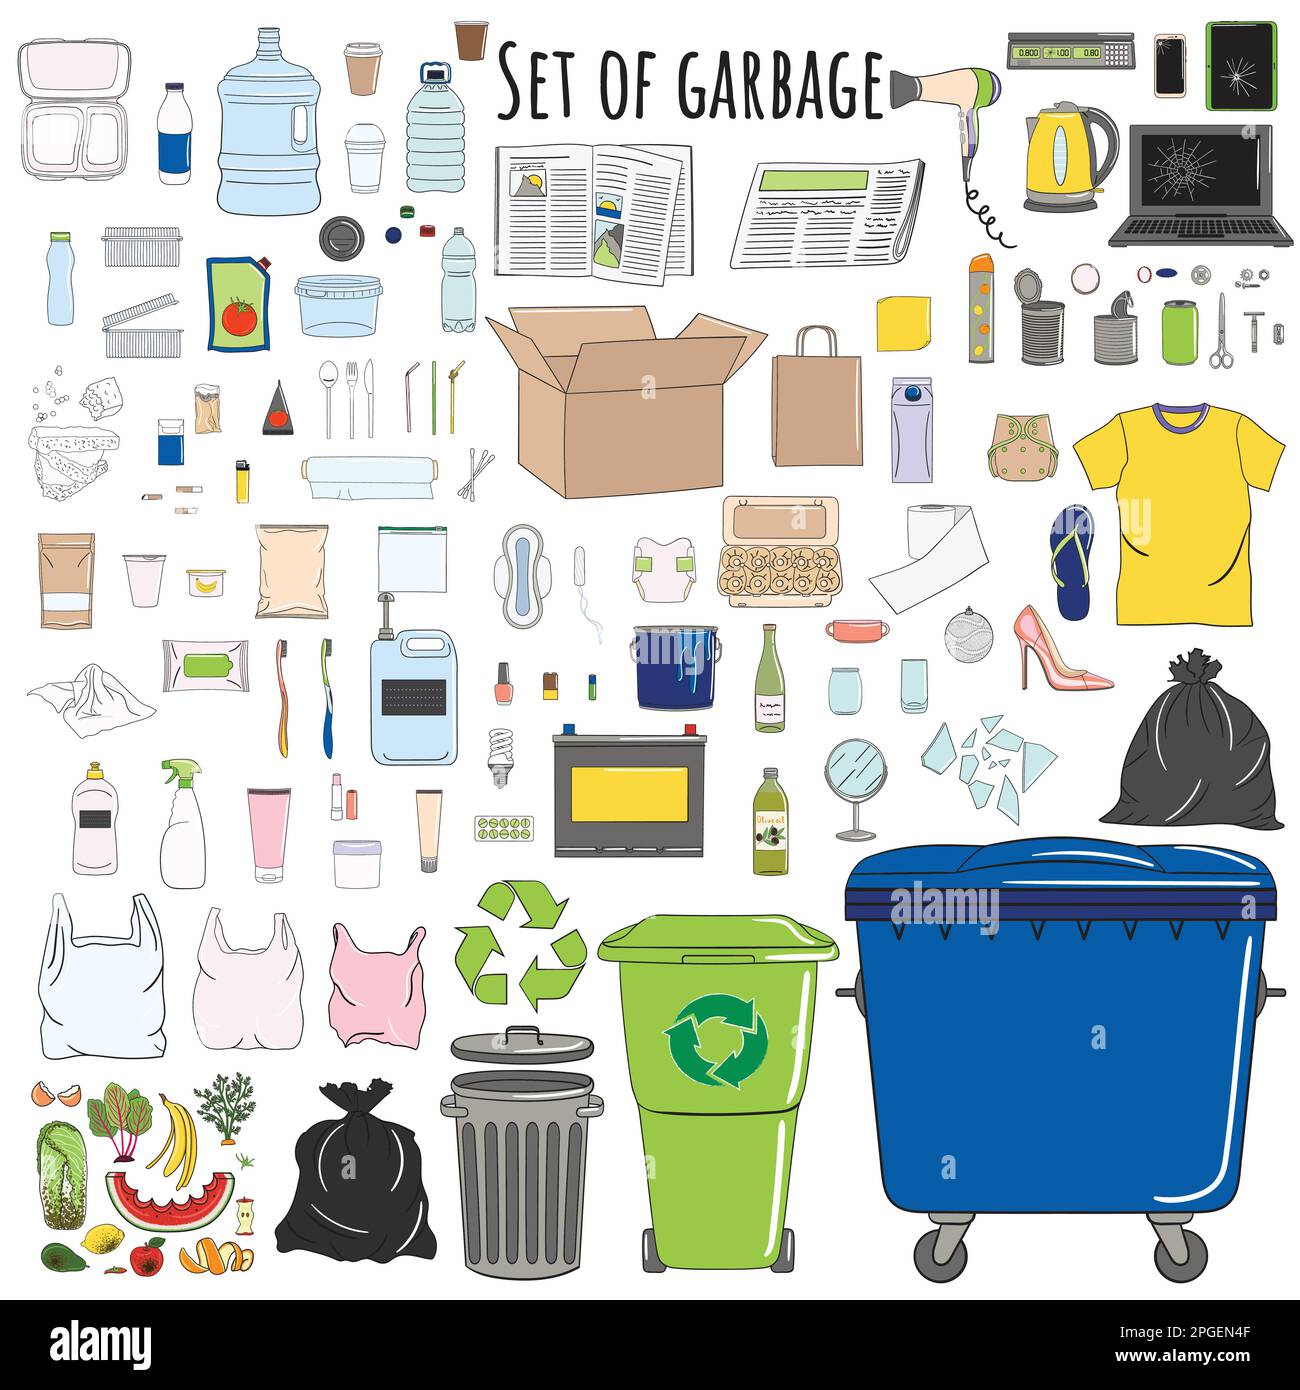 Set of sorted garbage. Recycle trash bins. Waste management. Sorting garbage. Organic, metal, plastic, paper, glass, e-waste, special, mixed trash. Ha Stock Vector